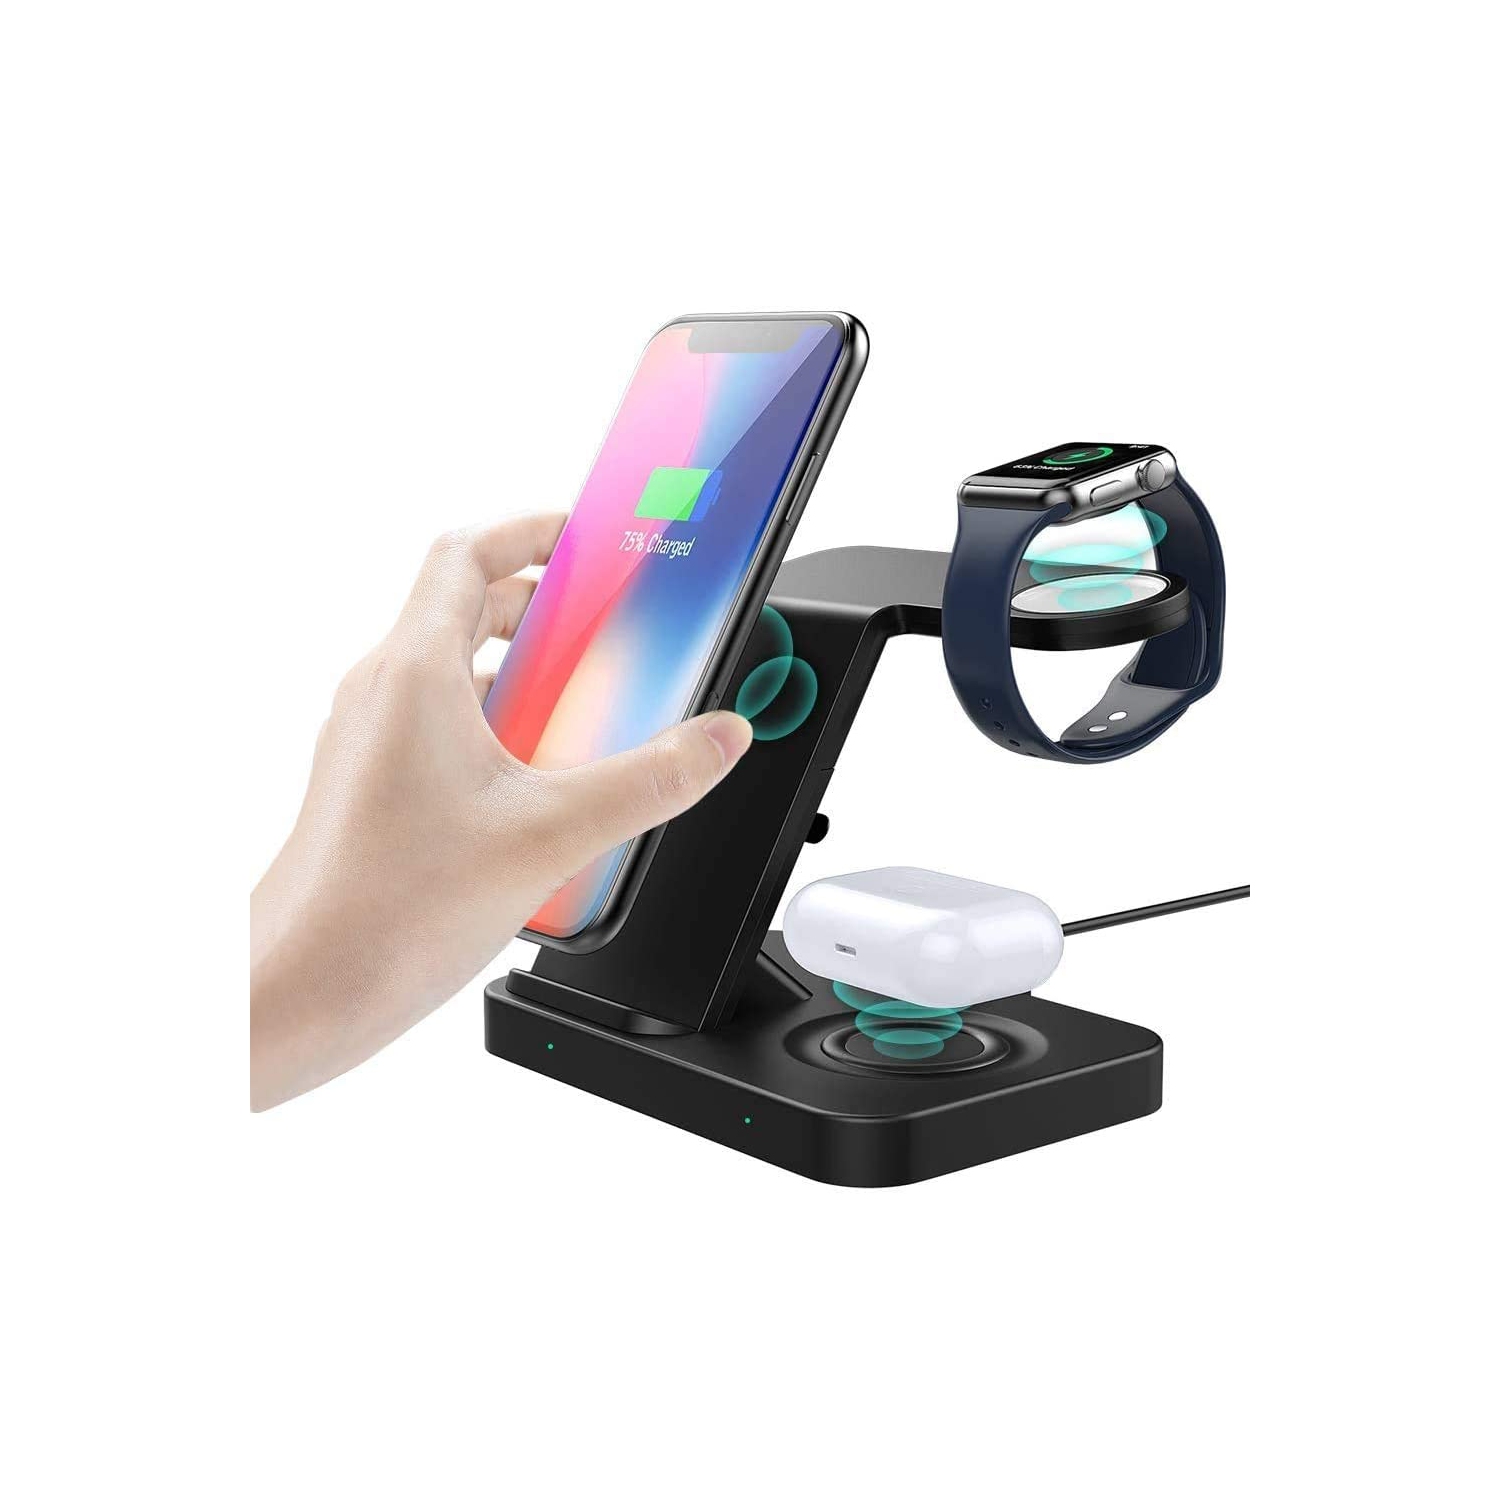 Wireless Charging Station 3 1 Wireless Charger Stand Fast Wireless Charging Dock For